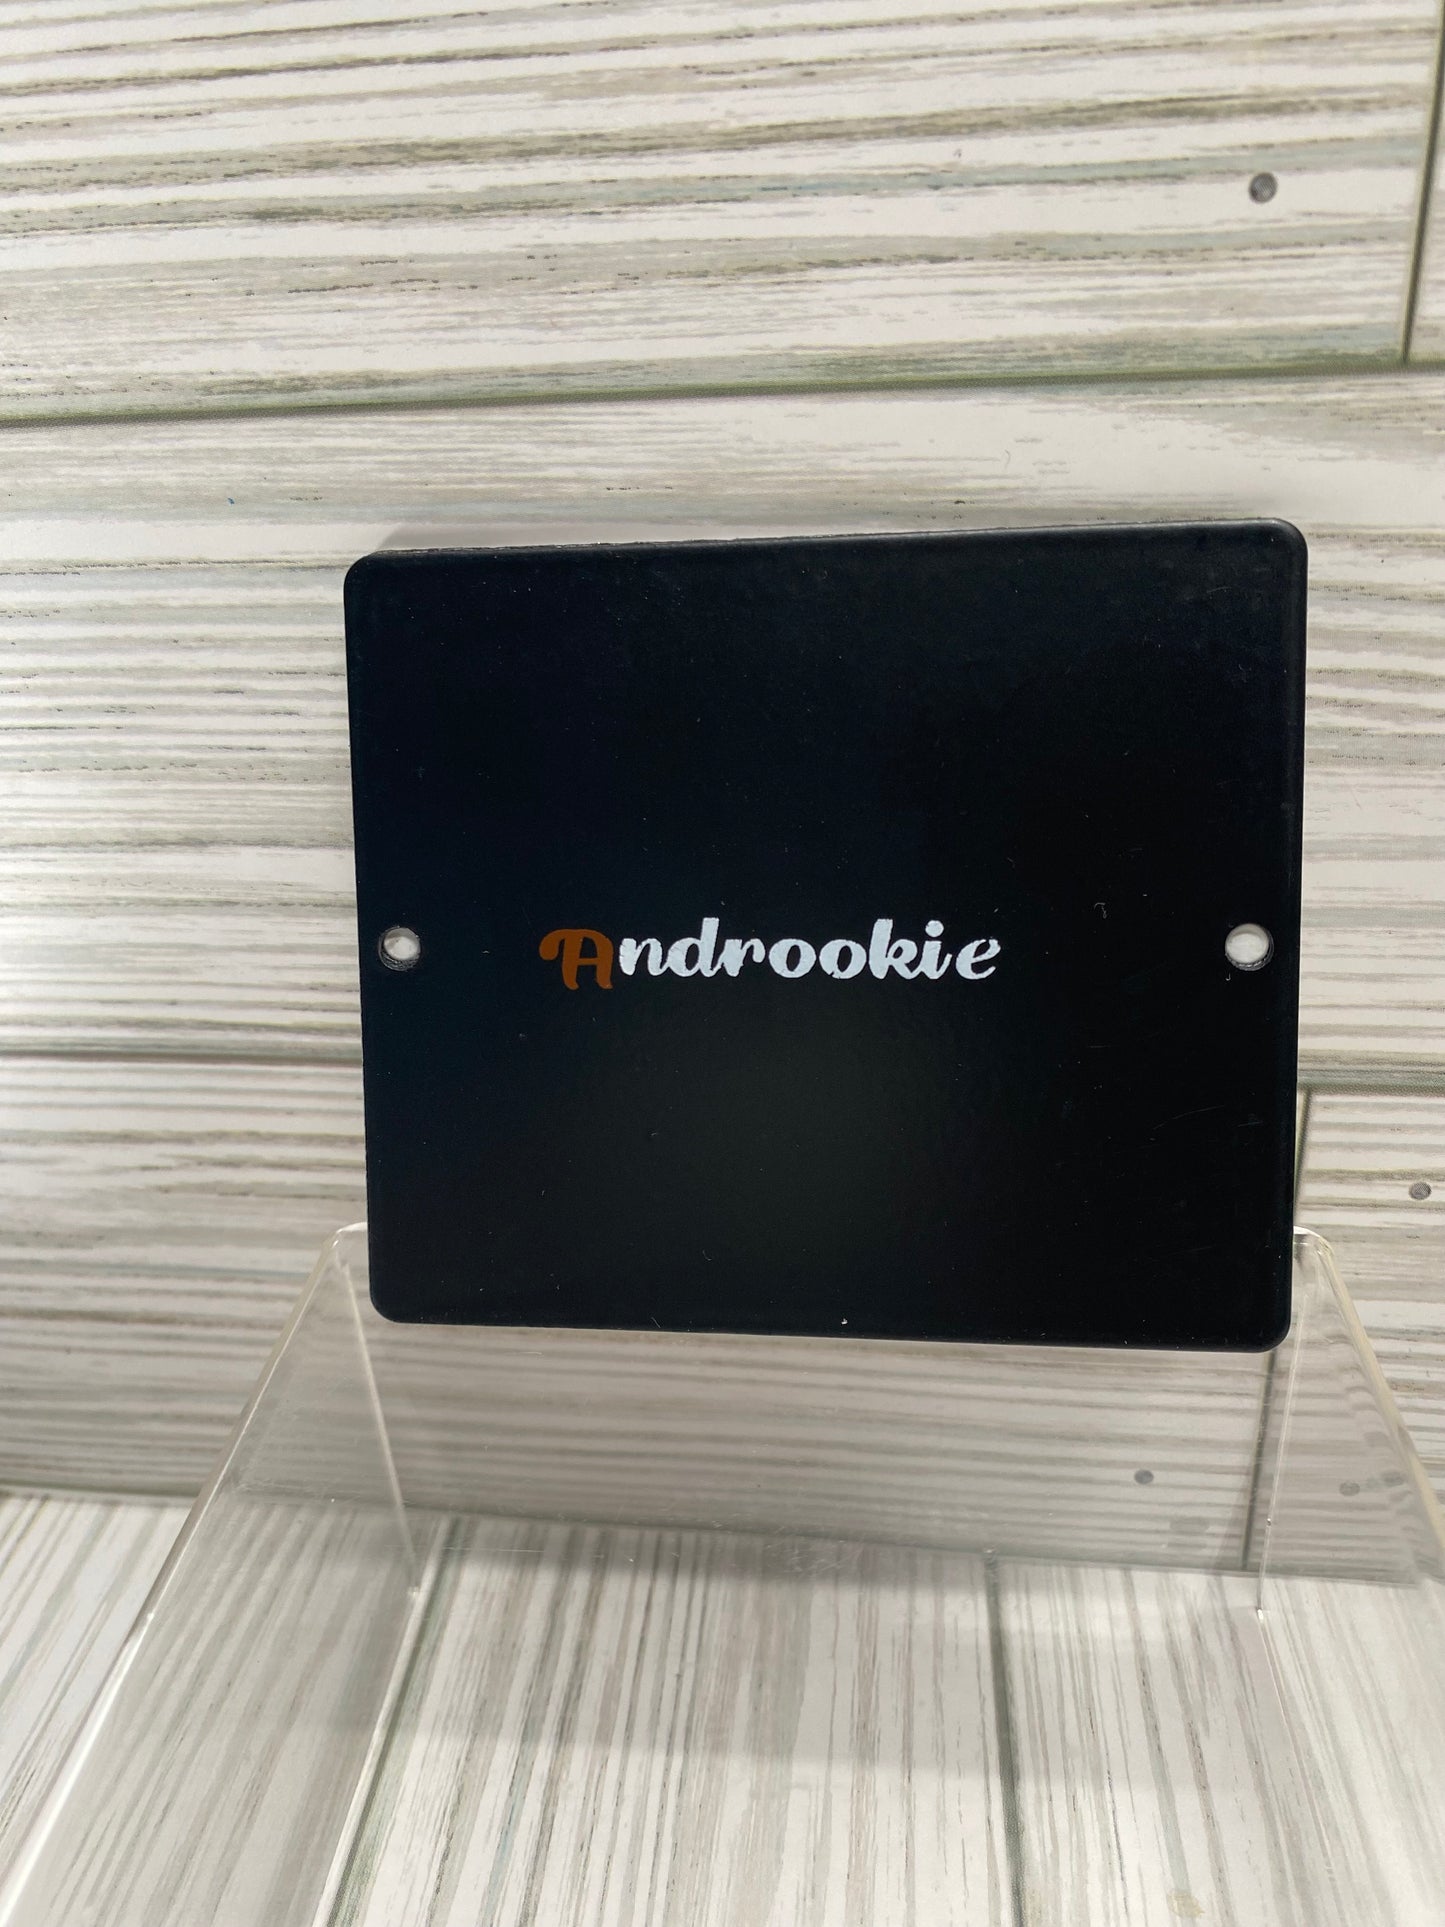 Androokie Sticky Plates